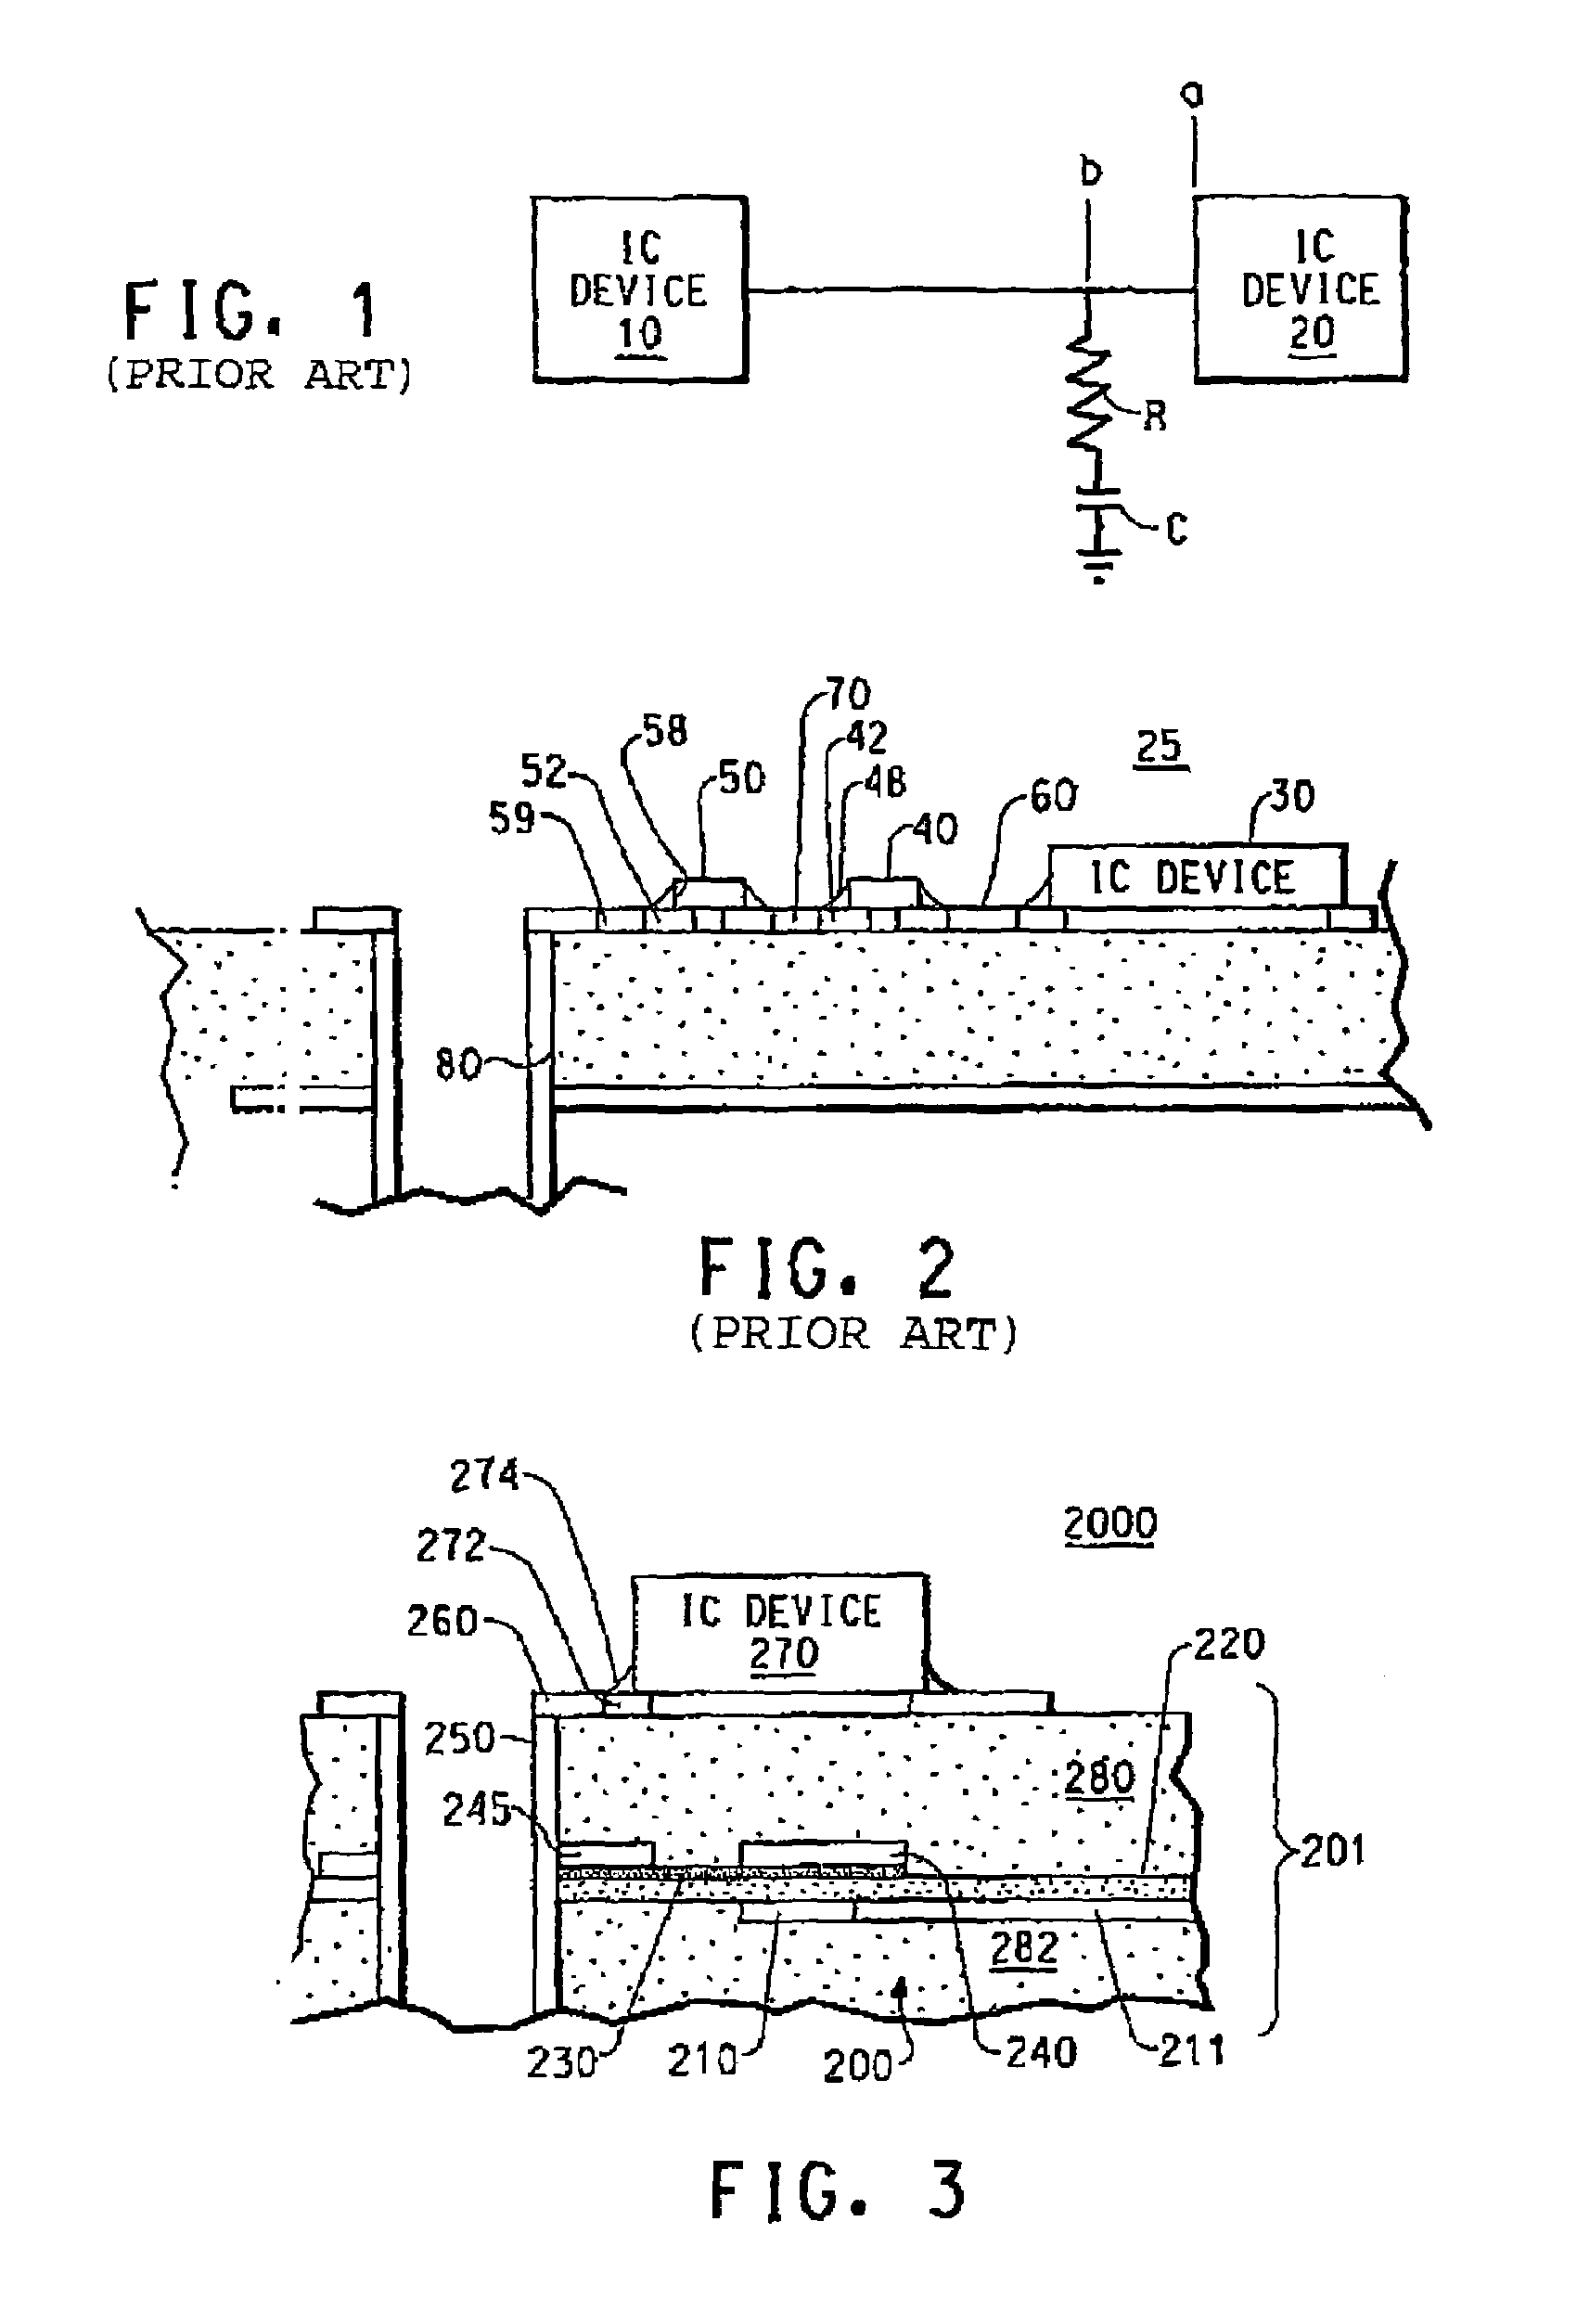 Capacitive/resistive devices, organic dielectric laminates and printed wiring boards incorporating such devices, and methods of making thereof